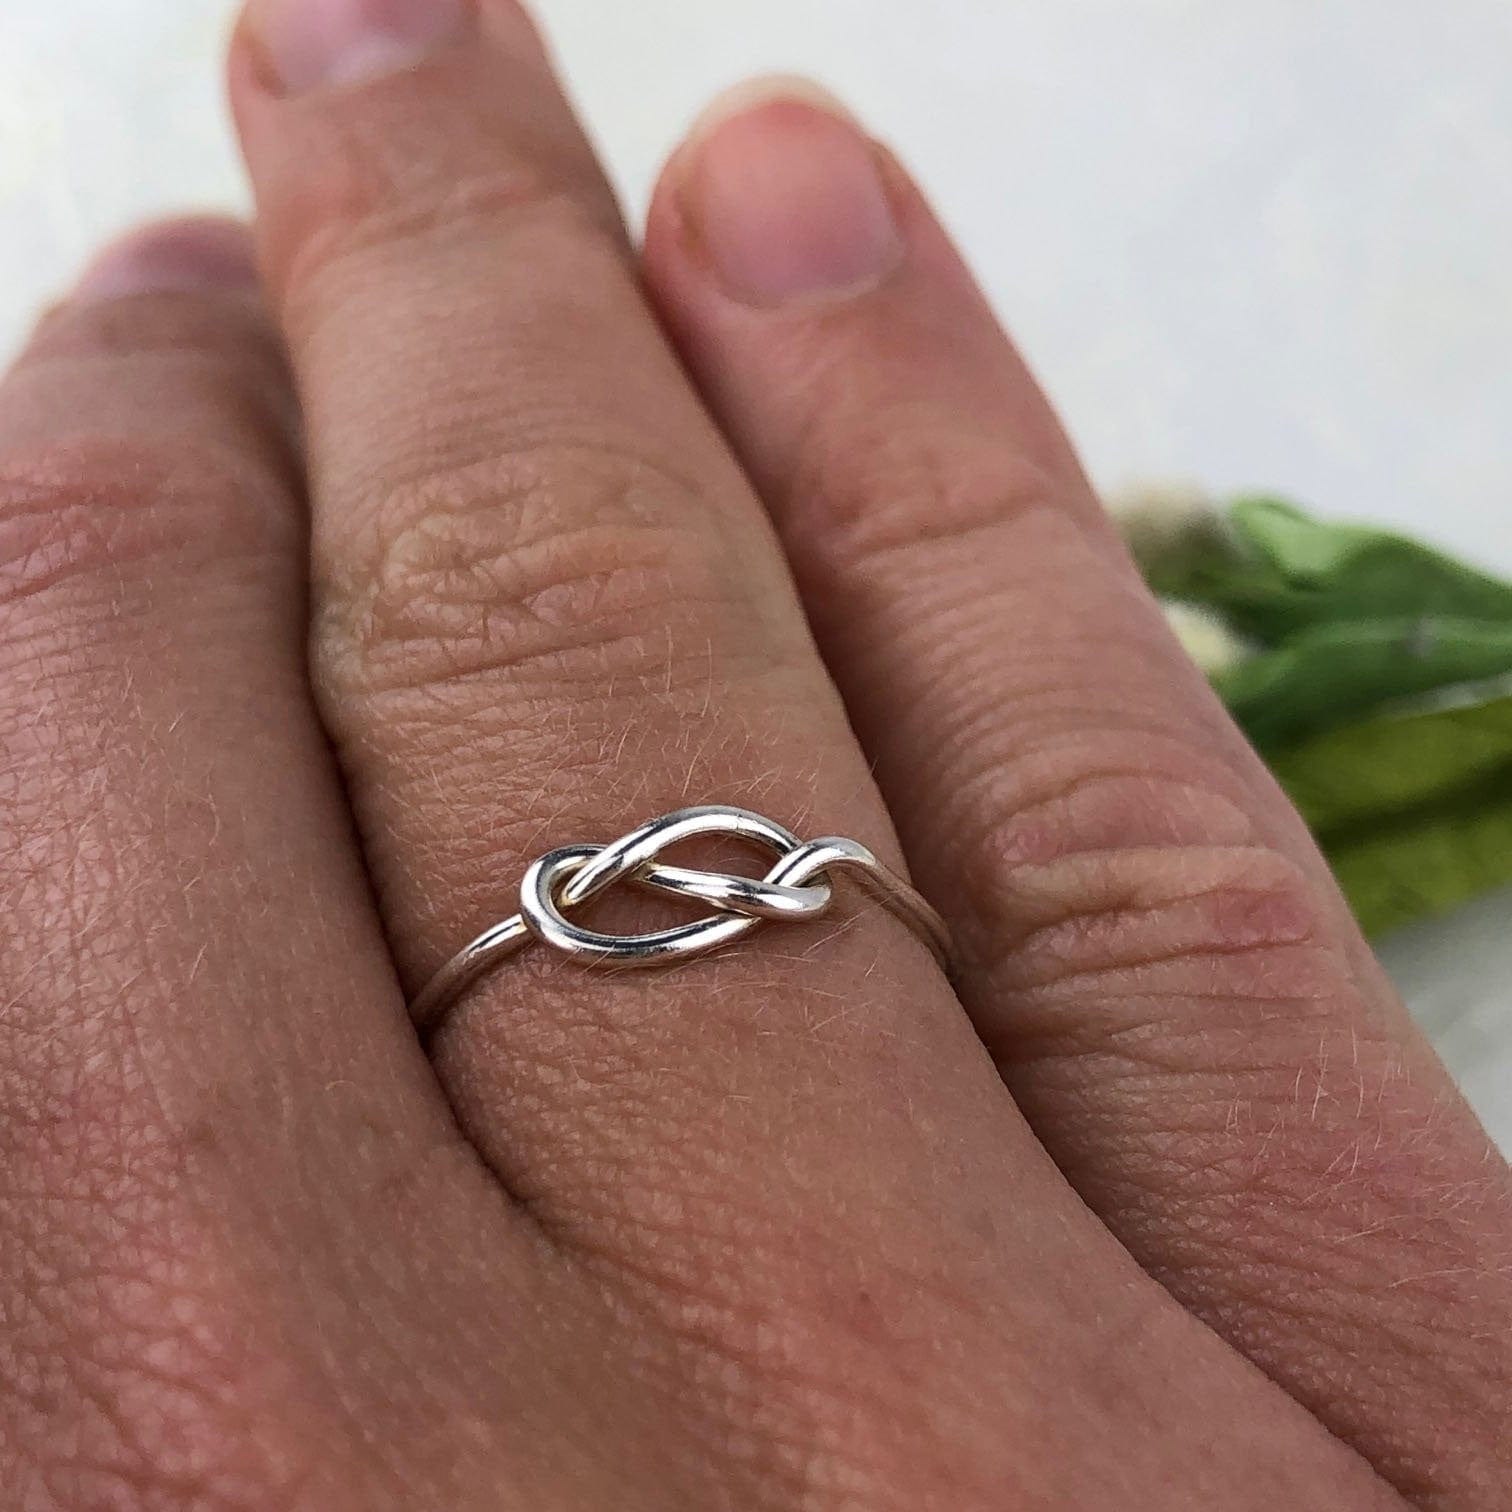 True Silver Knot Ring - Mettle by Abby